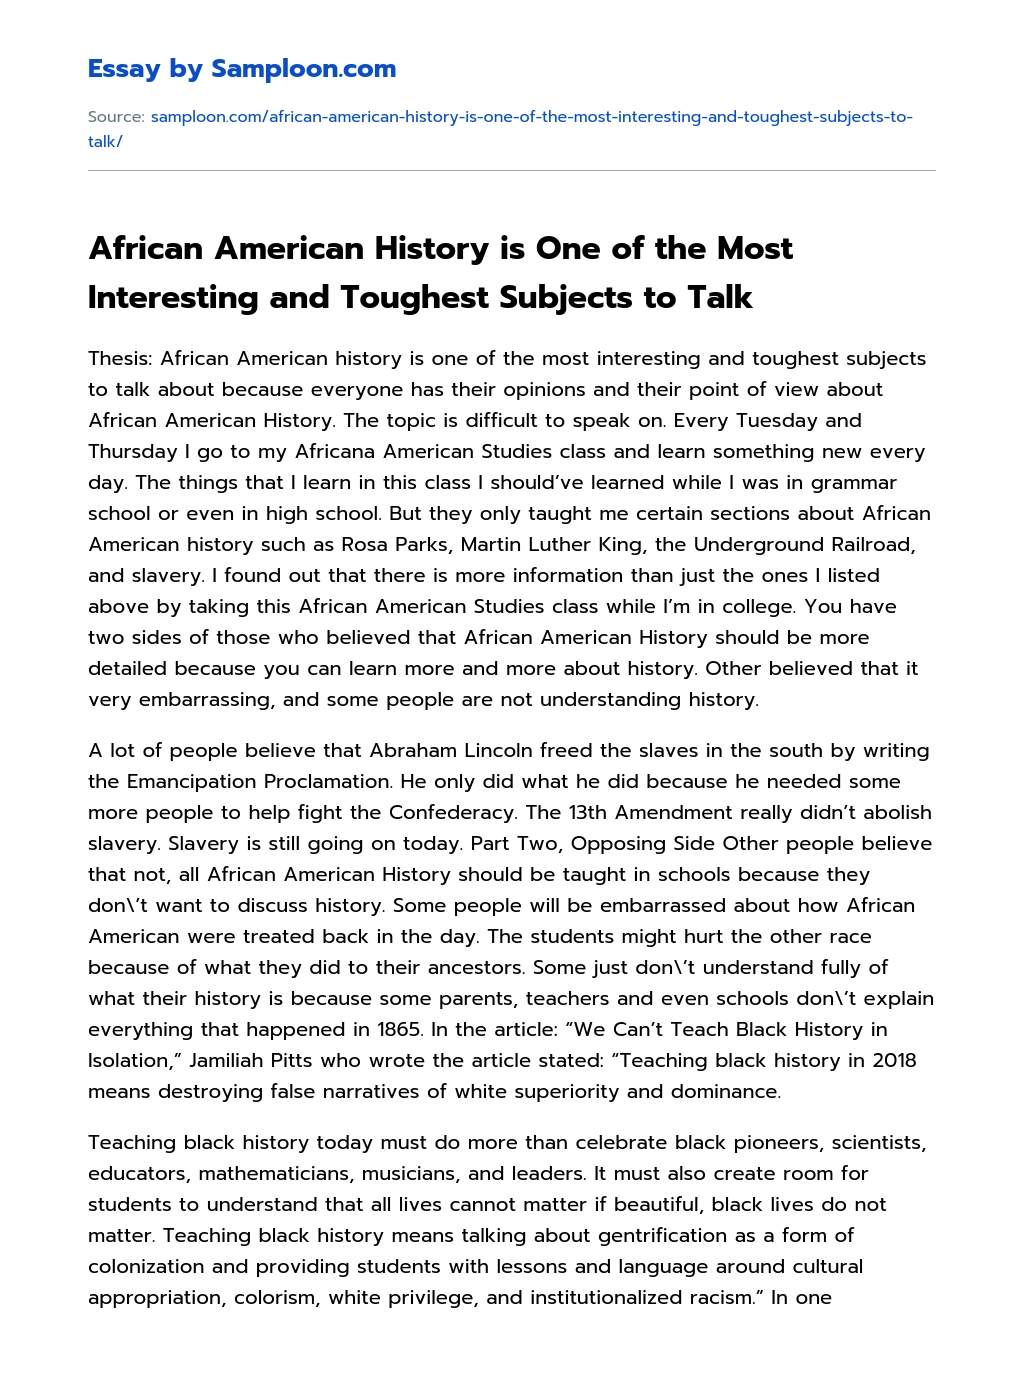 African American History is One of the Most Interesting and Toughest Subjects to Talk essay